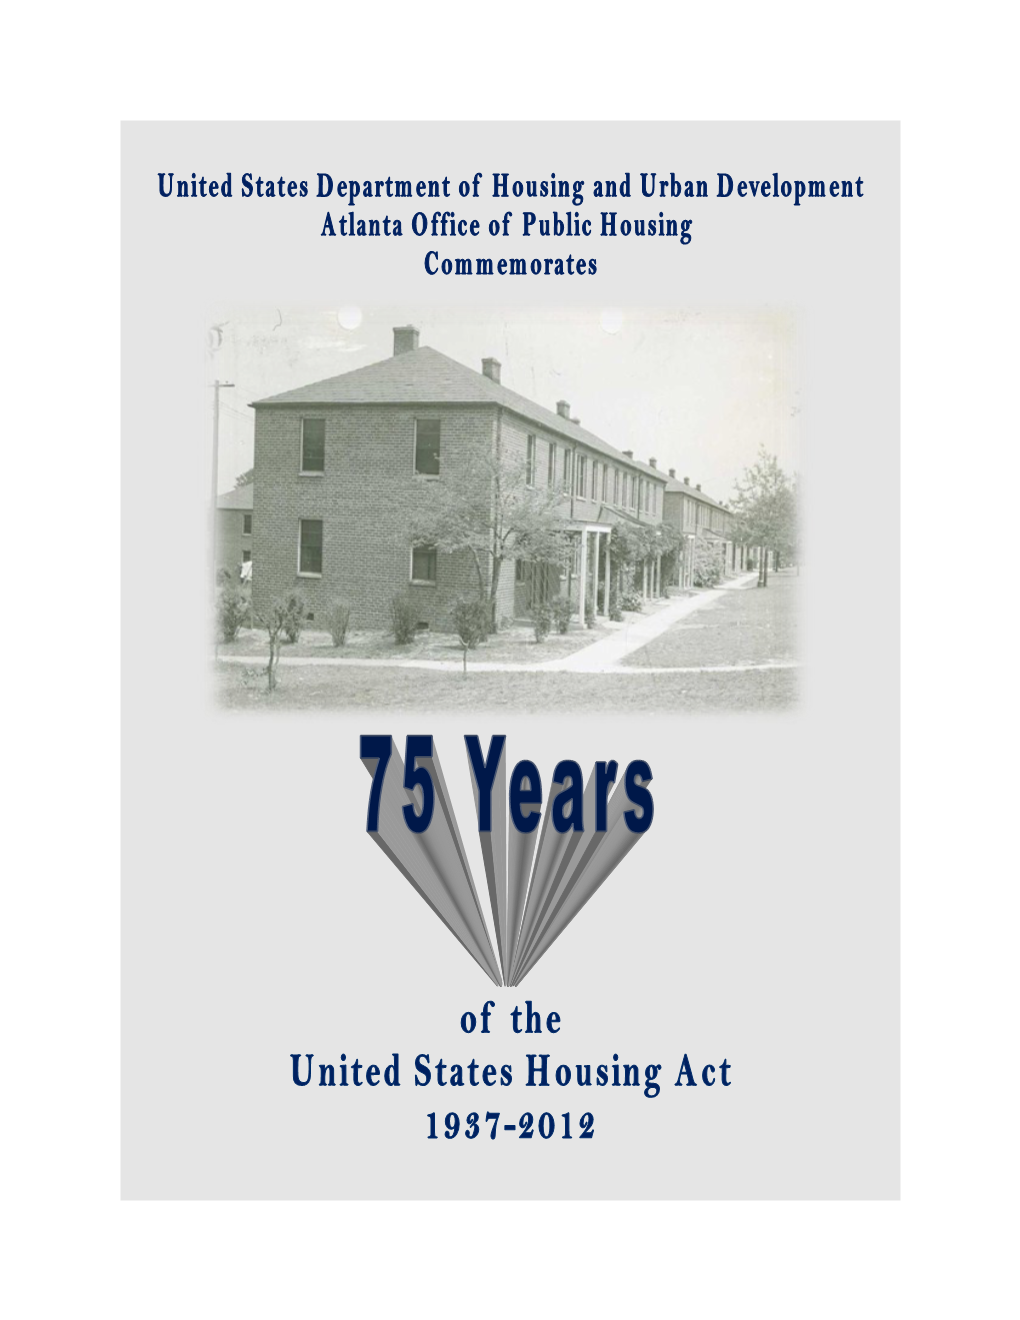 Atlanta Office of Public Housing Commemorates the 75Th Anniversary of the US Housing Act 1937-2012 October 2012